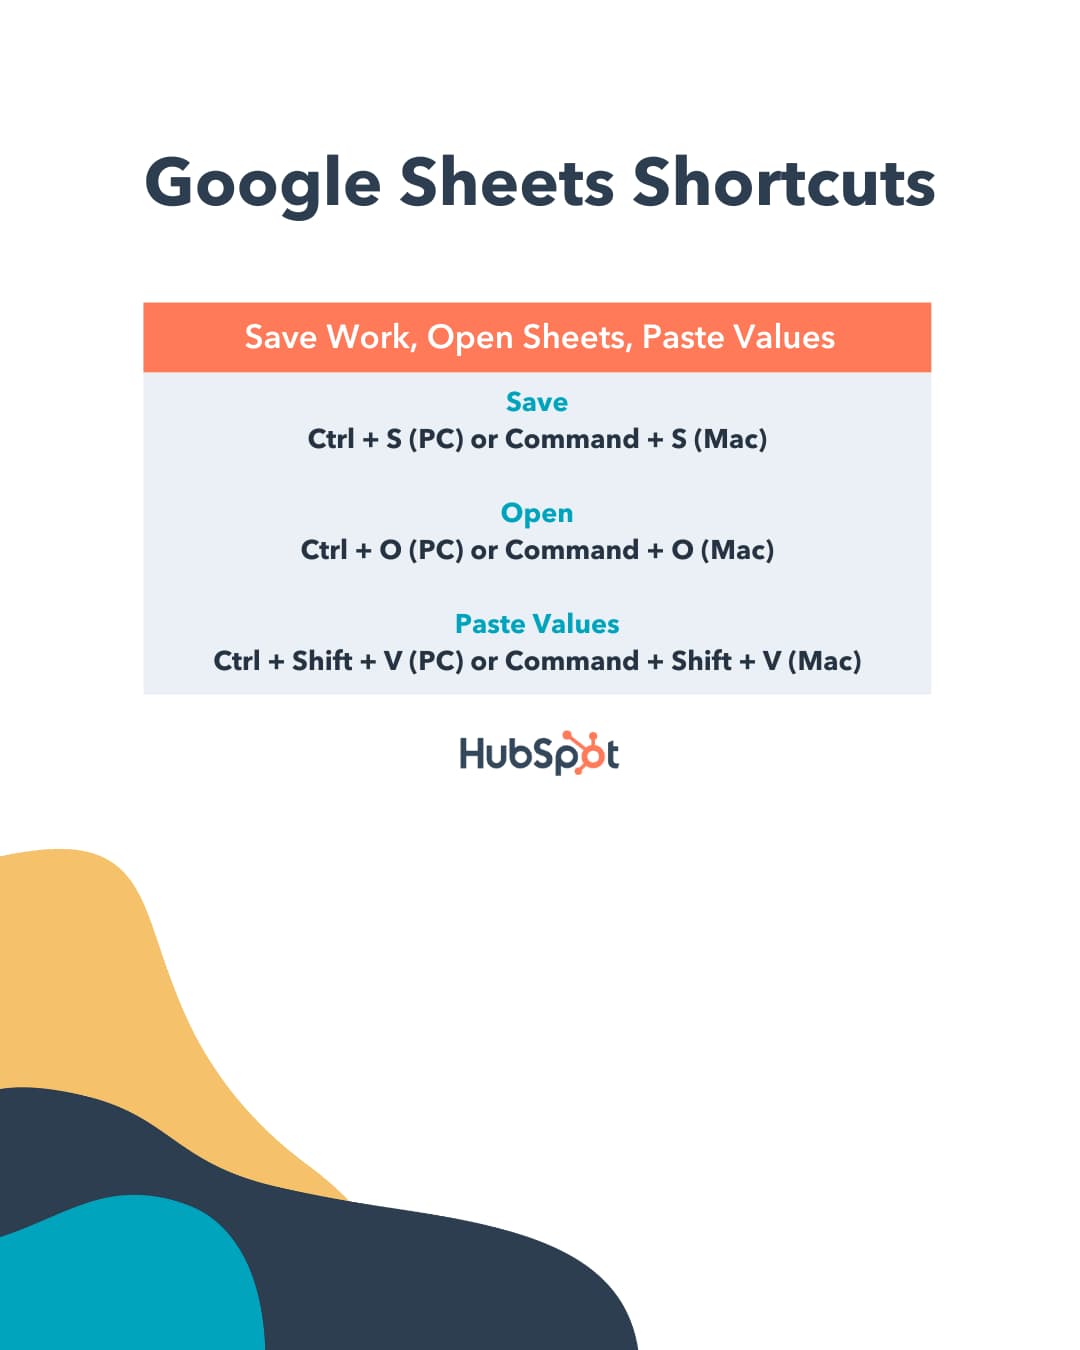 Using Google Sheets shortcuts to save work, open sheets, and paste values